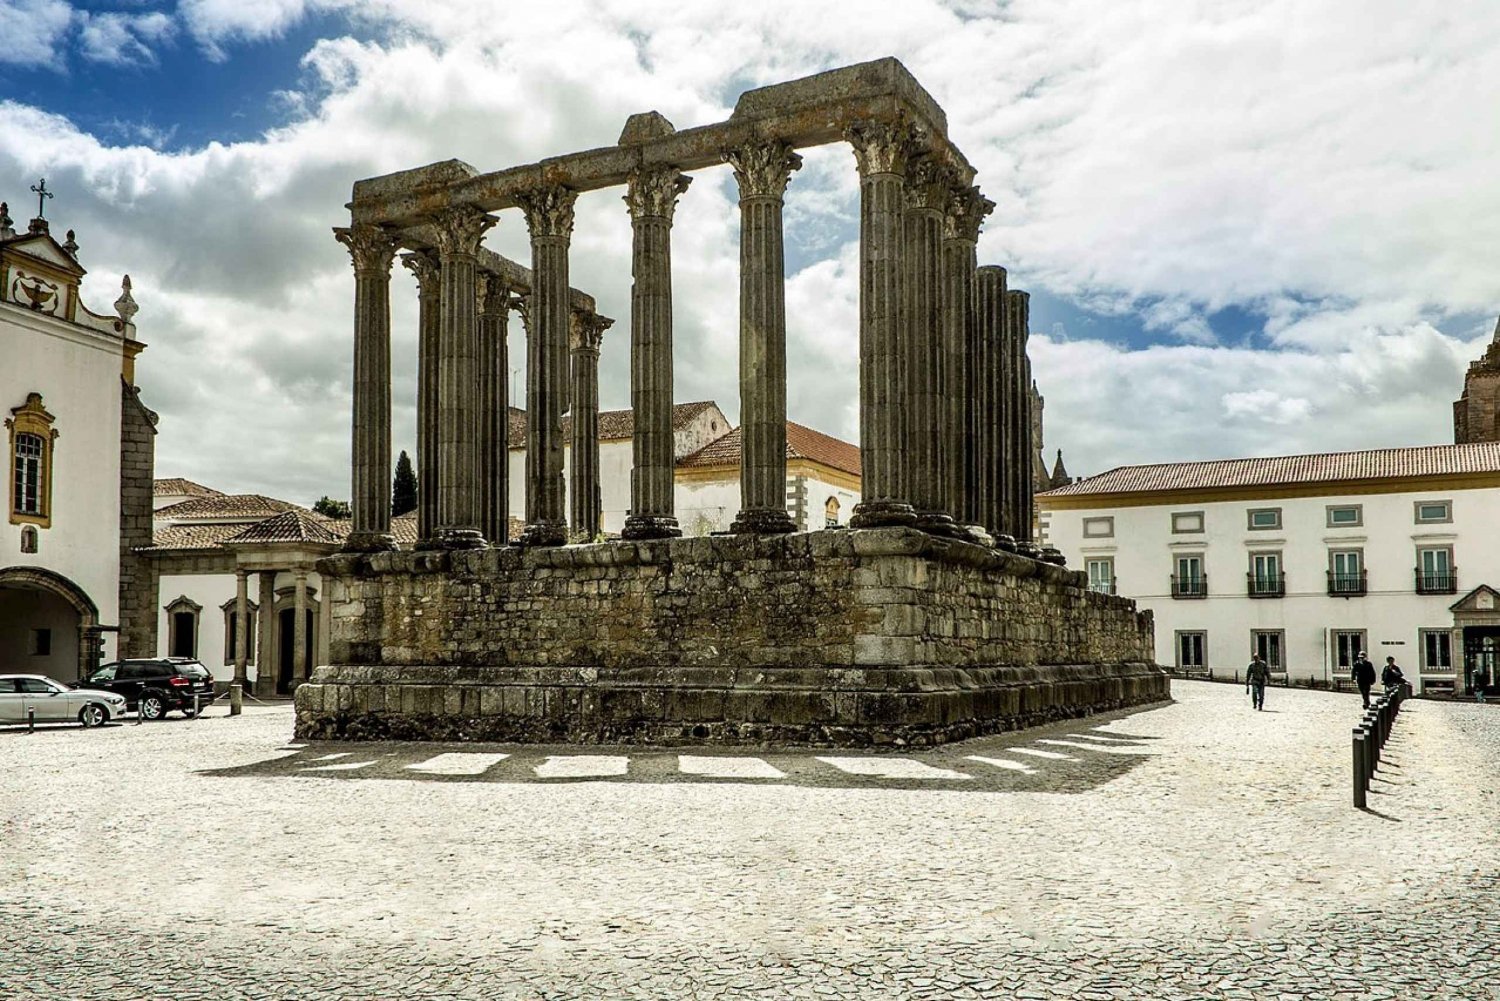 Lisbon: Private Tour Evora with Wine Tasting at the Cartuxa